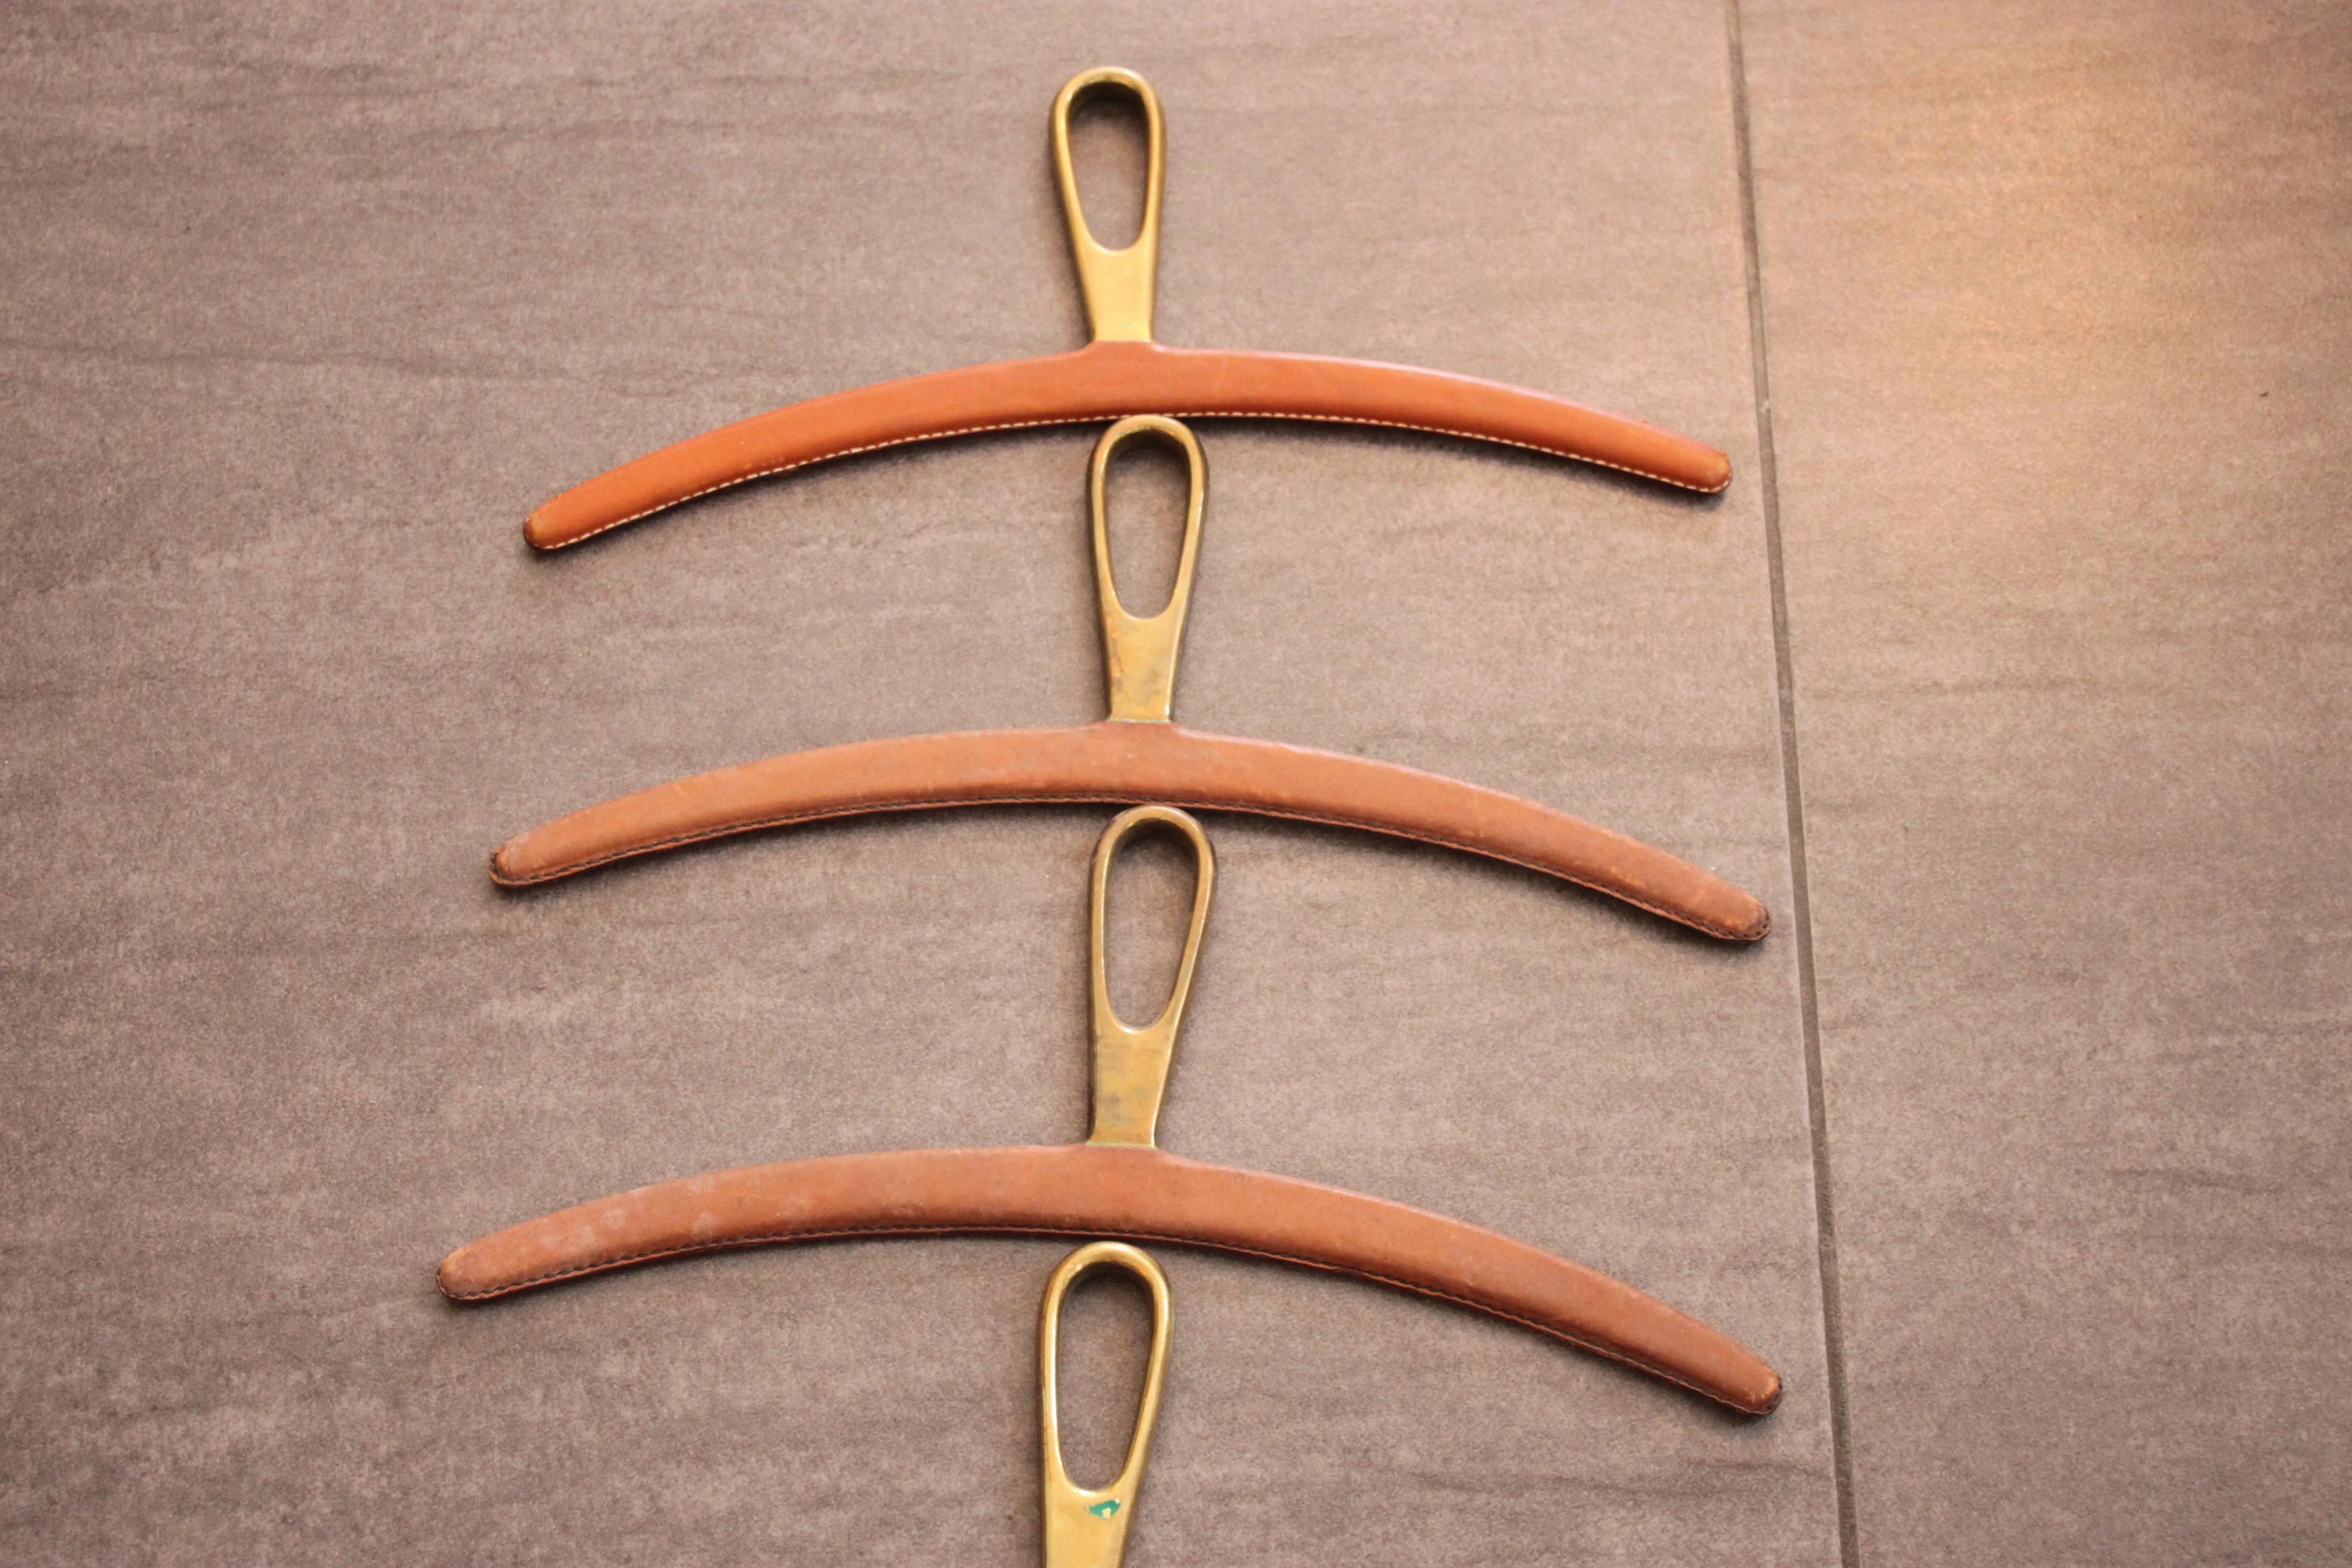 4 leather-coated brass coat hangers by Carl Auböck
Elegant shape and heavy use of massive brass.